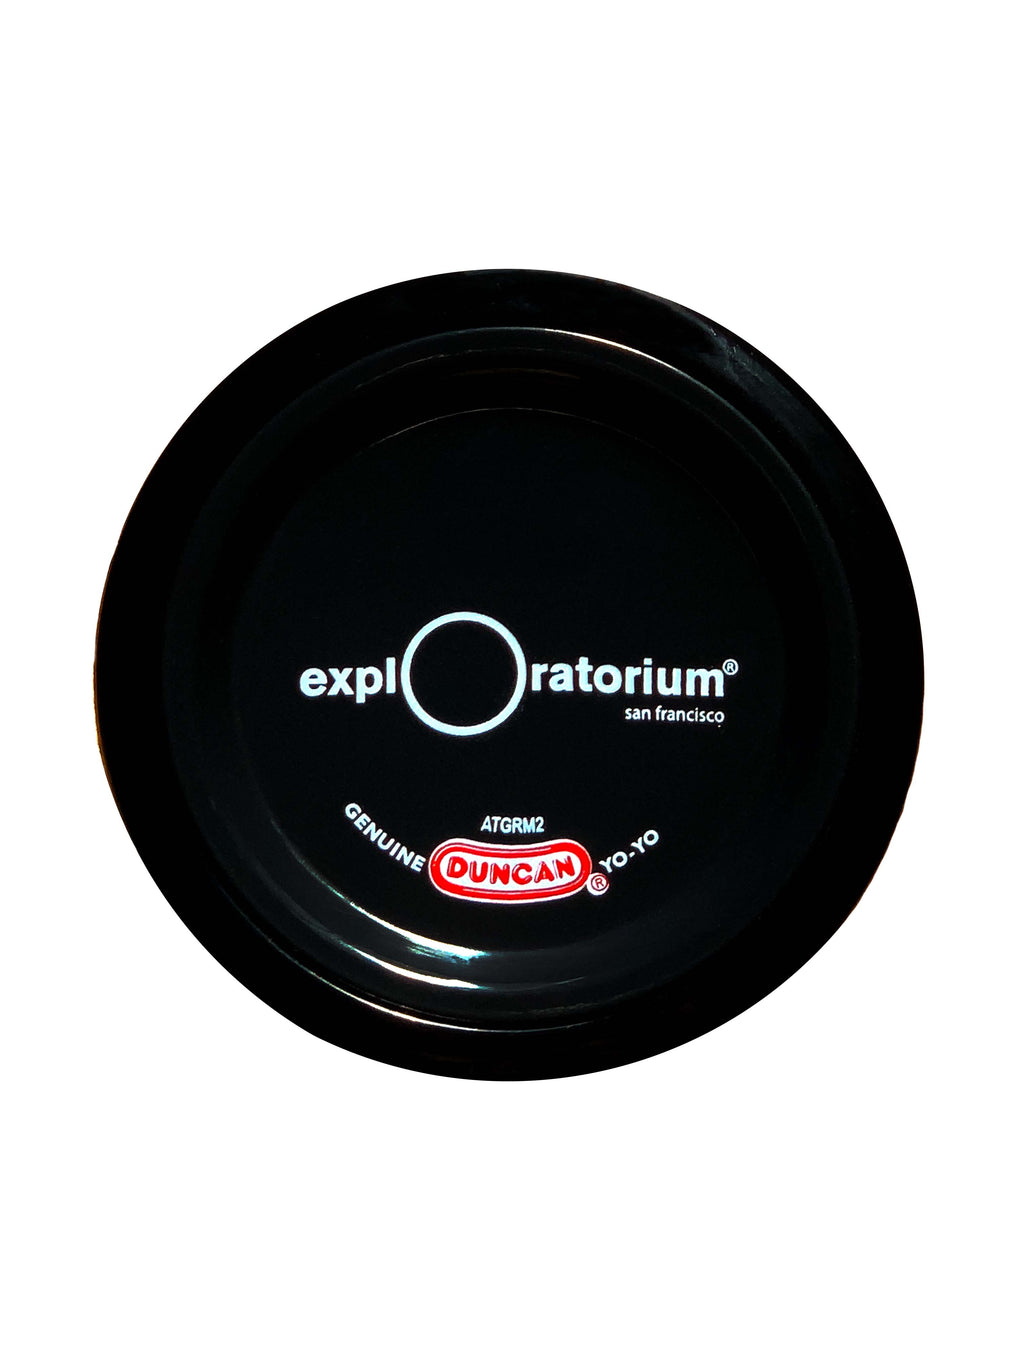 The opposite side of the black plastic yo-yo with the Exploratorium logo, San Francisco, in white across the middle and duncan in red.